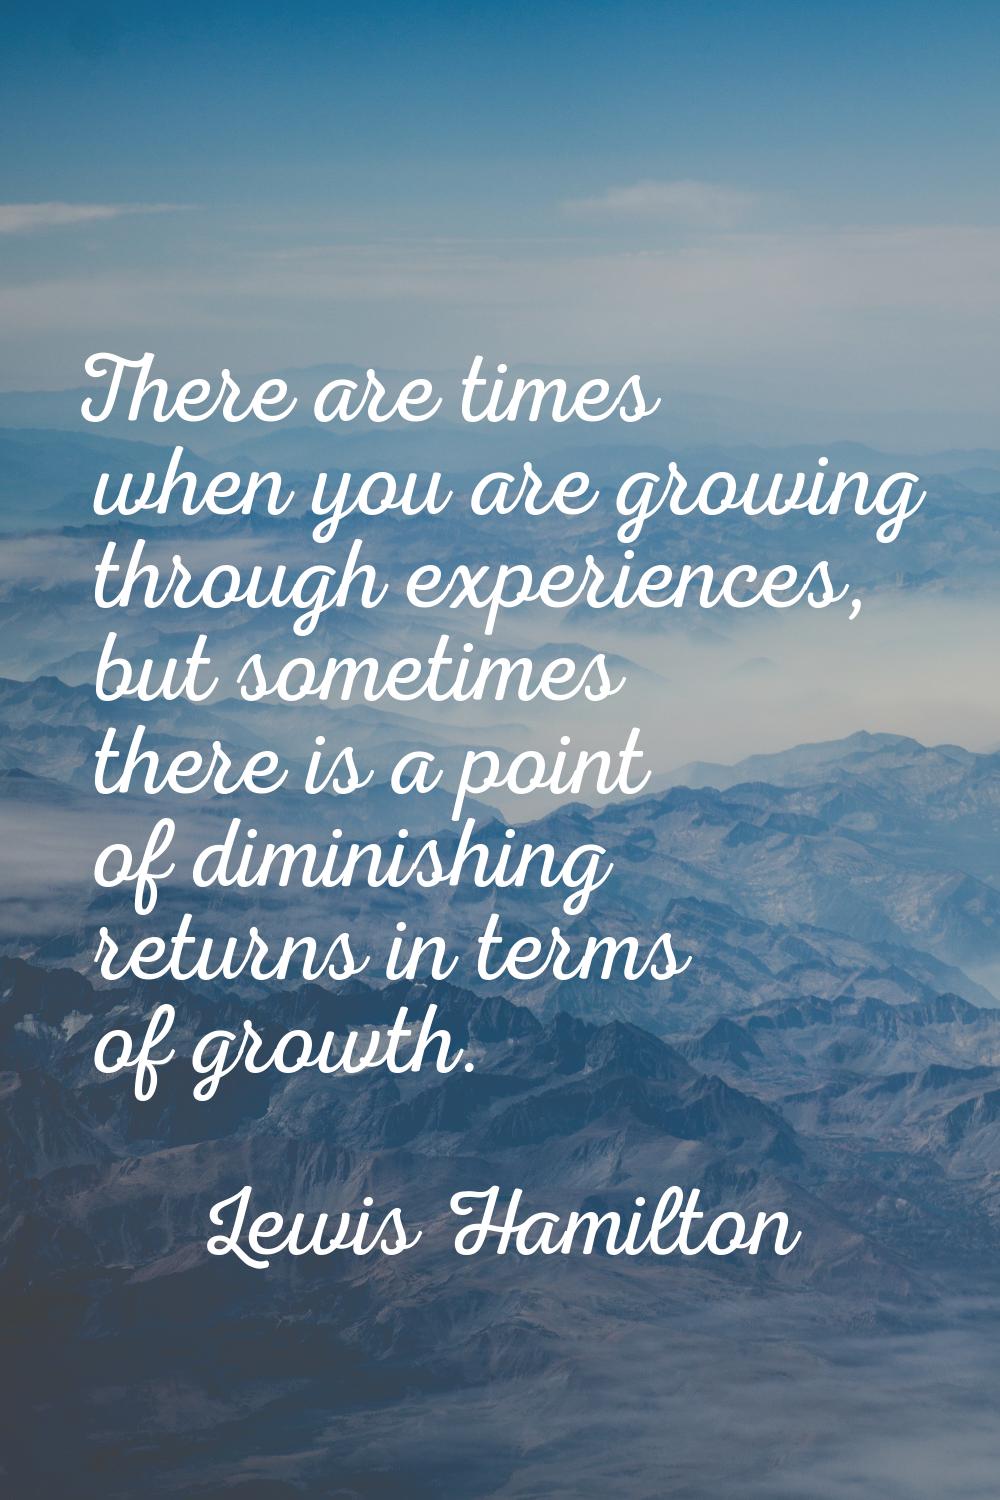 There are times when you are growing through experiences, but sometimes there is a point of diminis